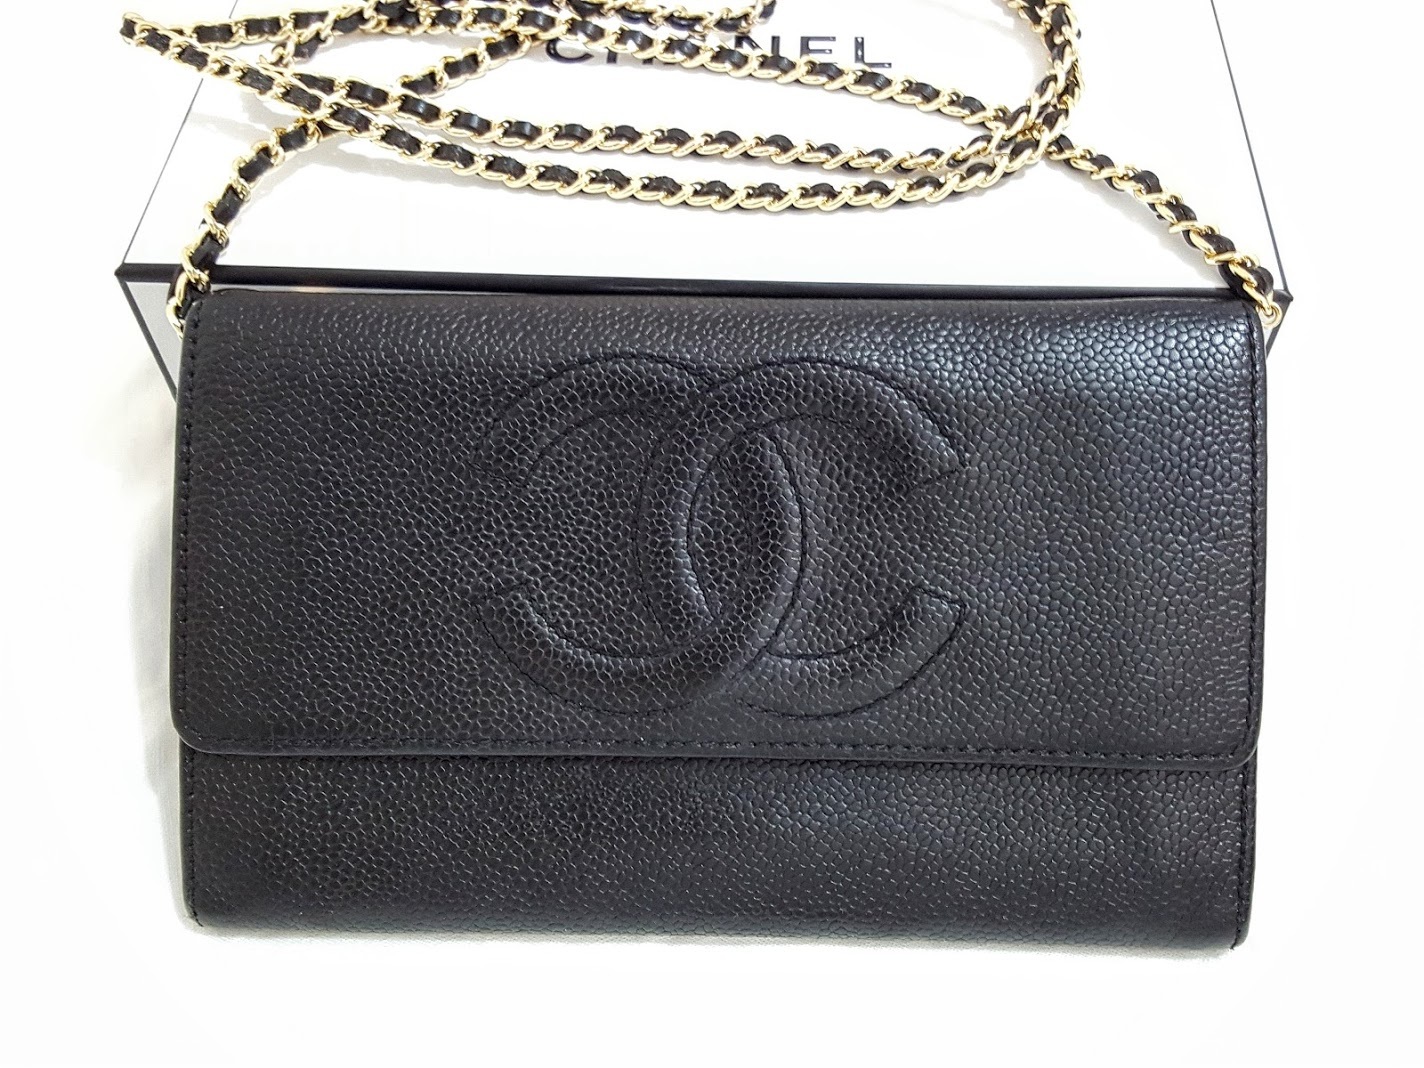 Auth CHANEL Timeless Black/Gold Caviar Skin Leather Large Flap WOC Crossbody Bag - $398.00